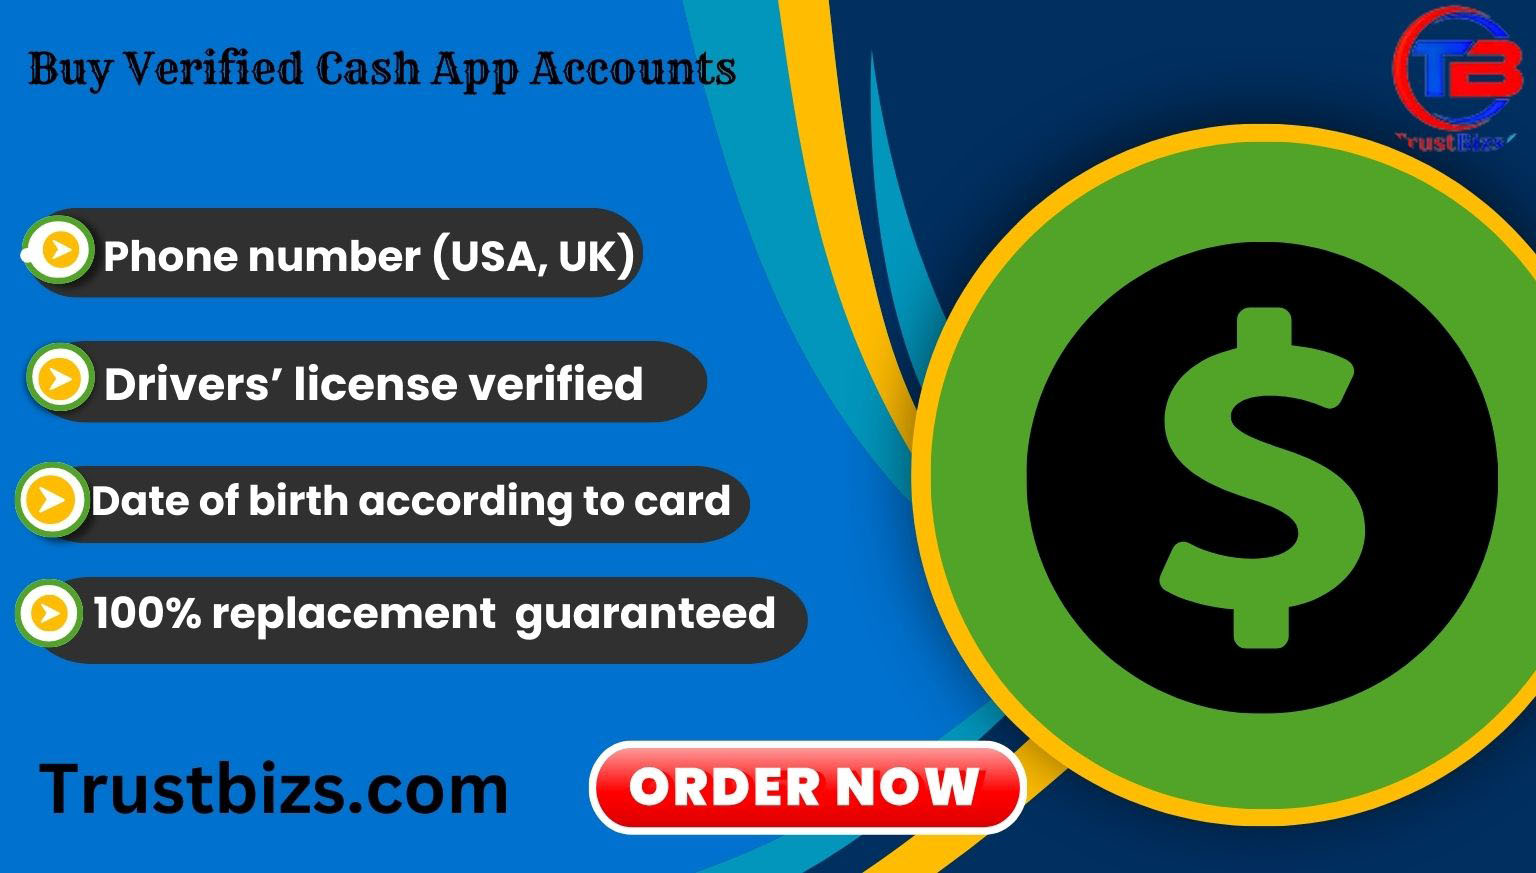 Buy verified cash app accounts verified with email, phone number, birth date, SSN, debit card, Driving license and bank account available